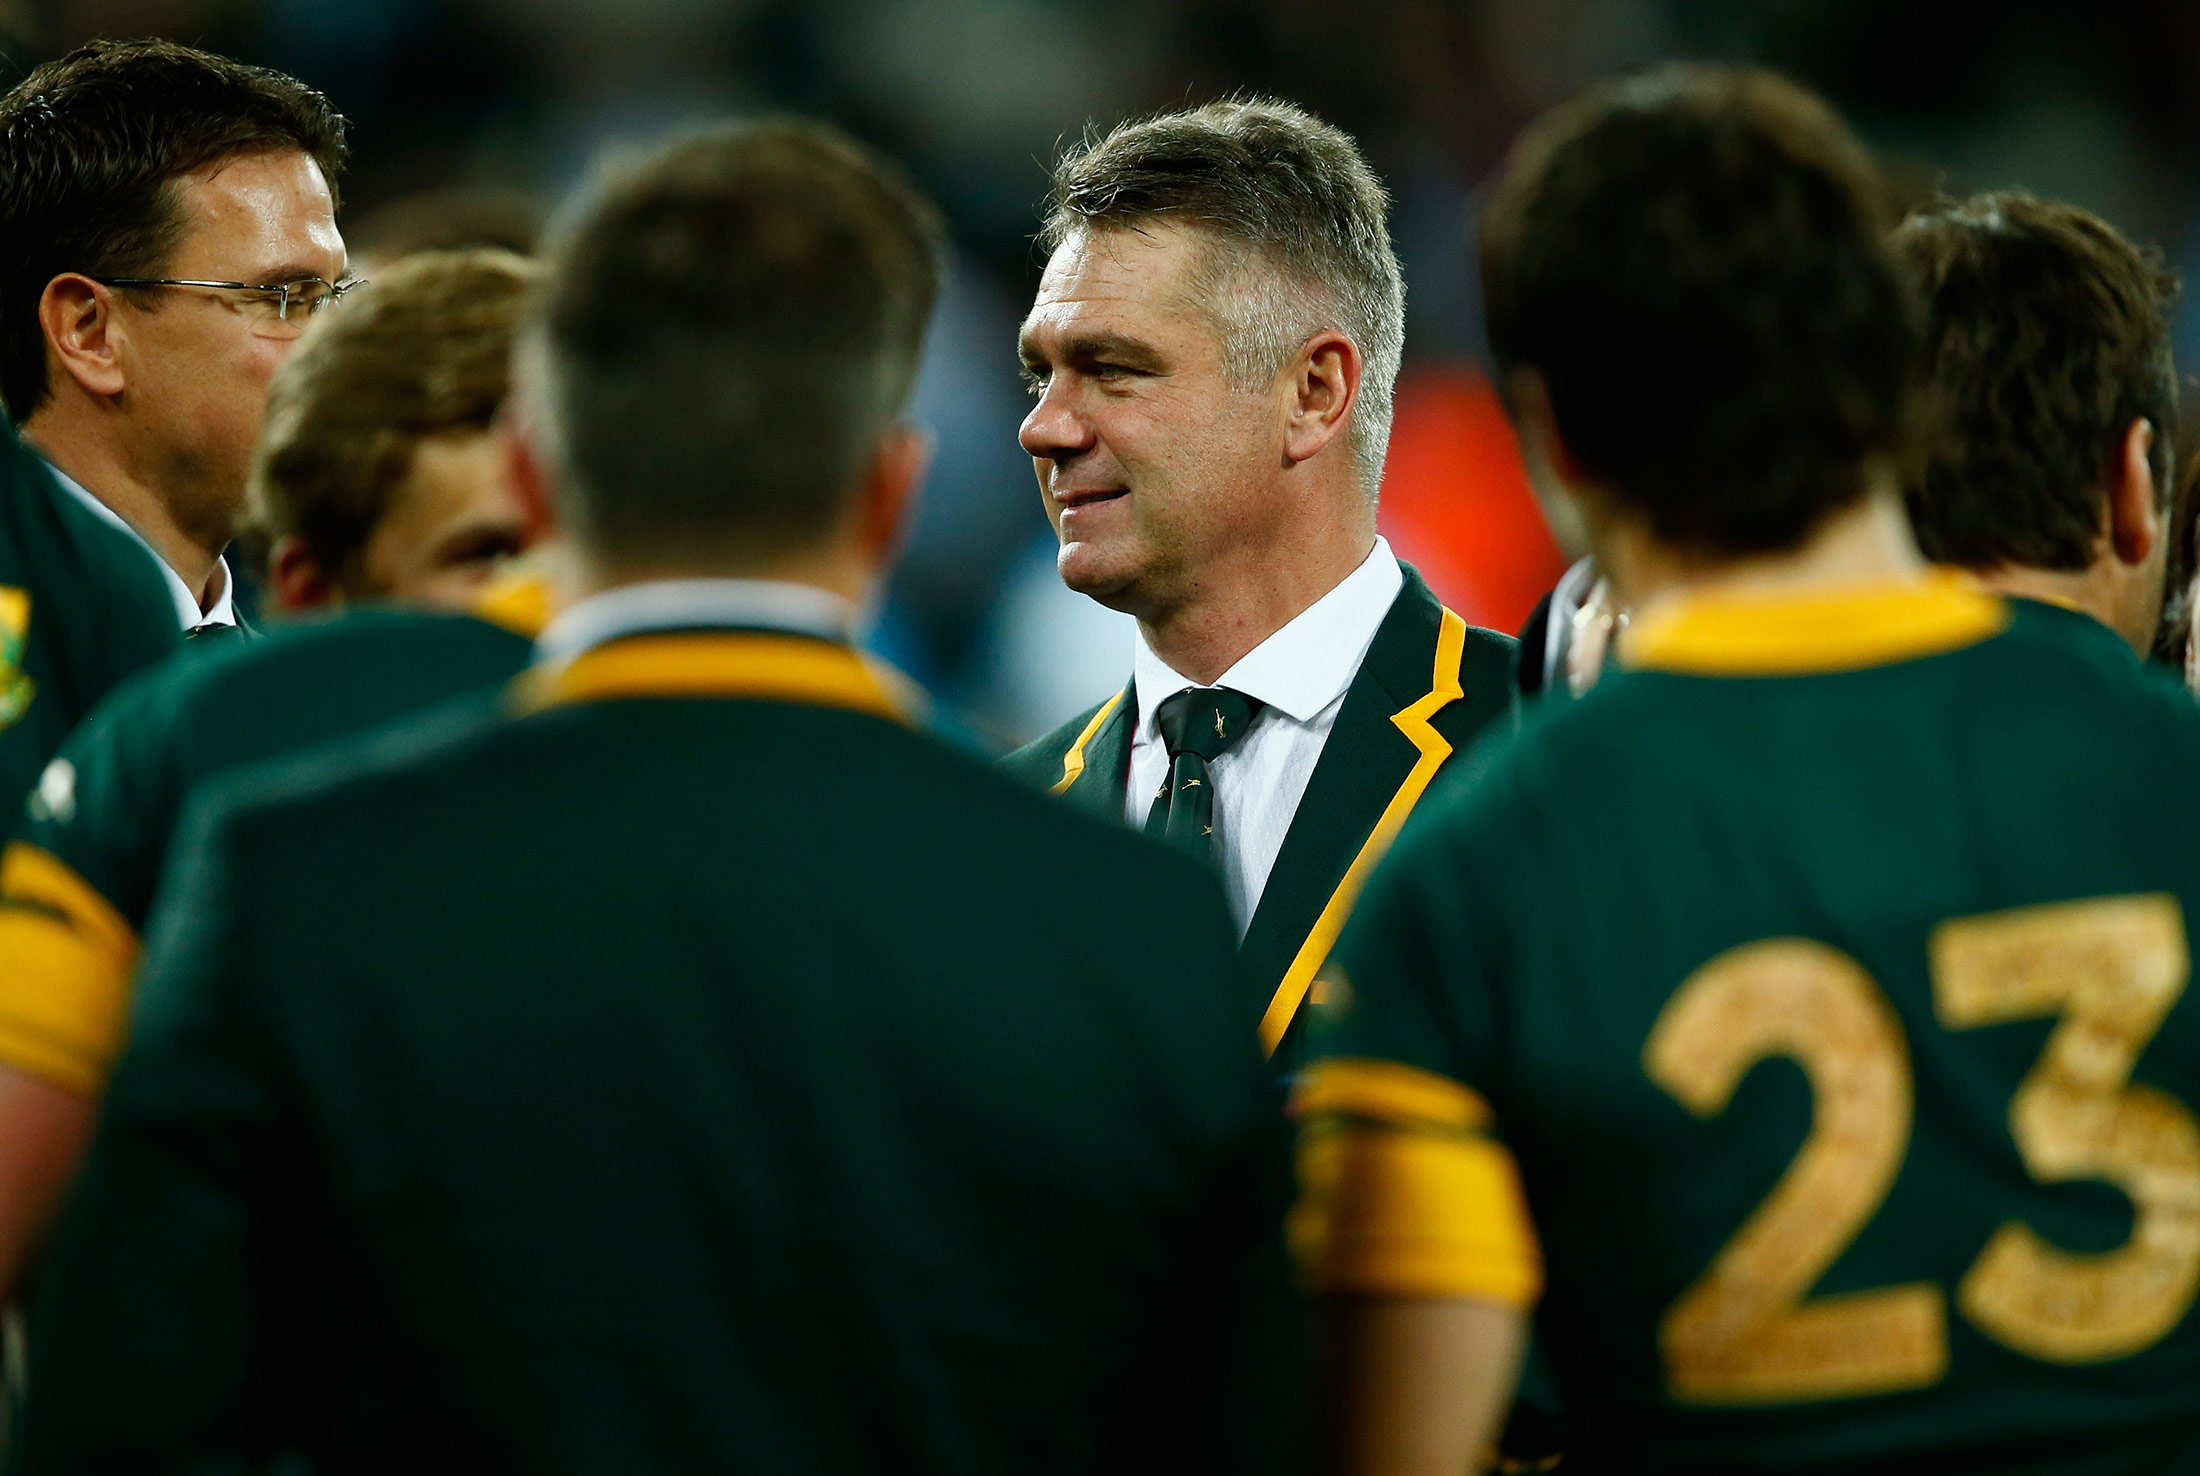 South African Rugby Coach Heyneke Meyer to Stand Down, SARU Says